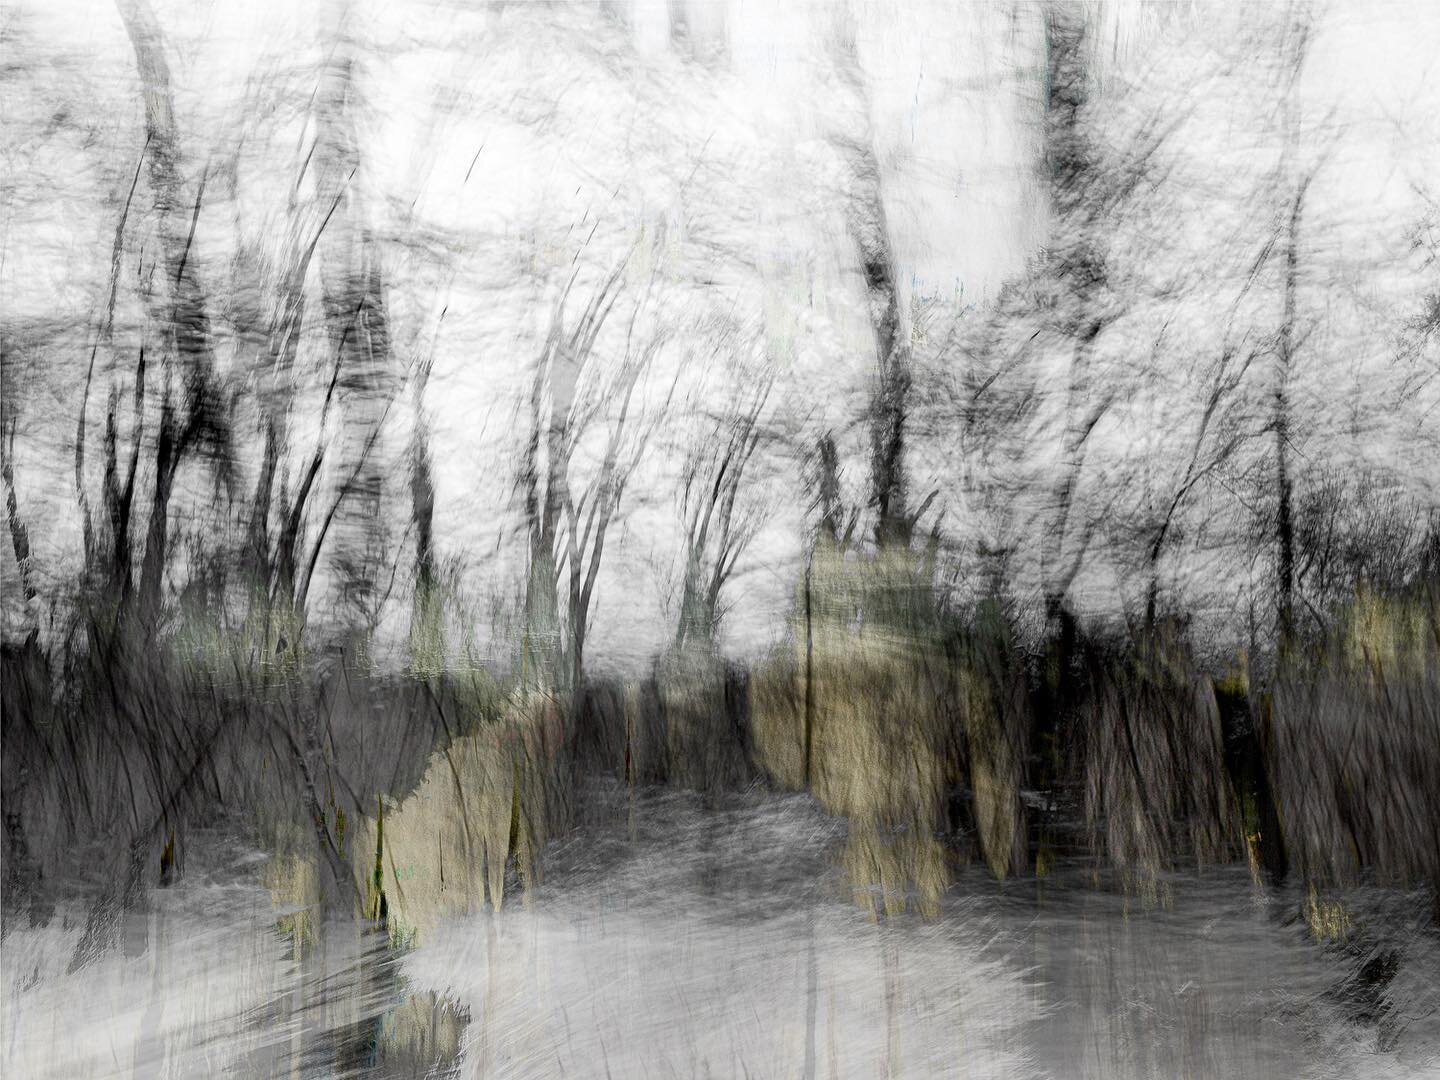 Altered Landscapes no.336

Prints available
DM me for information 

#regnierstudio #intentionalcameramovement&nbsp;#icm #abstractphotography&nbsp;#abstract #fineartphotography&nbsp;#impressionism #abstractart&nbsp;#impressionistphotography #icmphotog